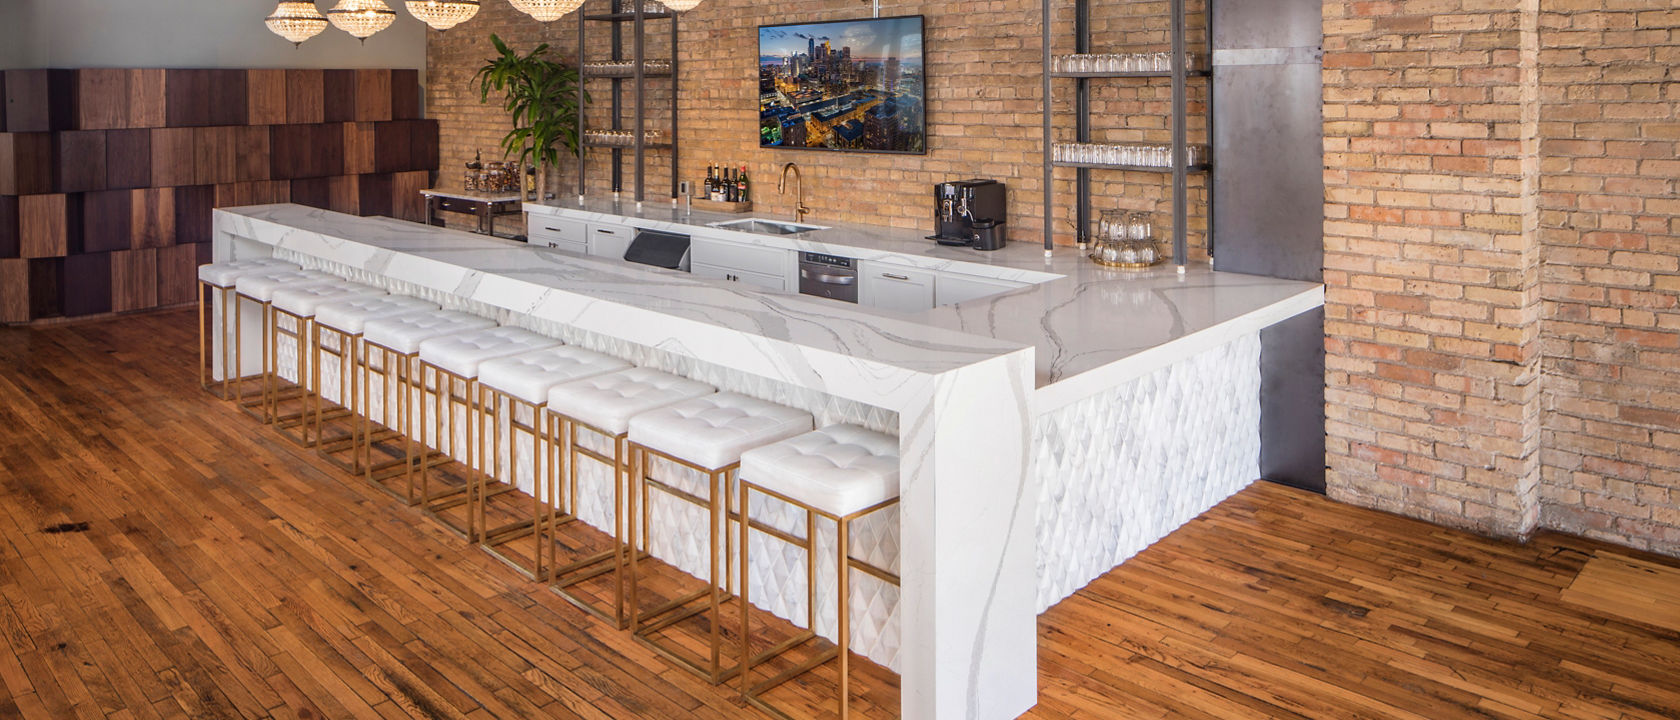 A white bar counter with ten stools sitting in front of the counter surrounded by wooden flooring and brick siding.